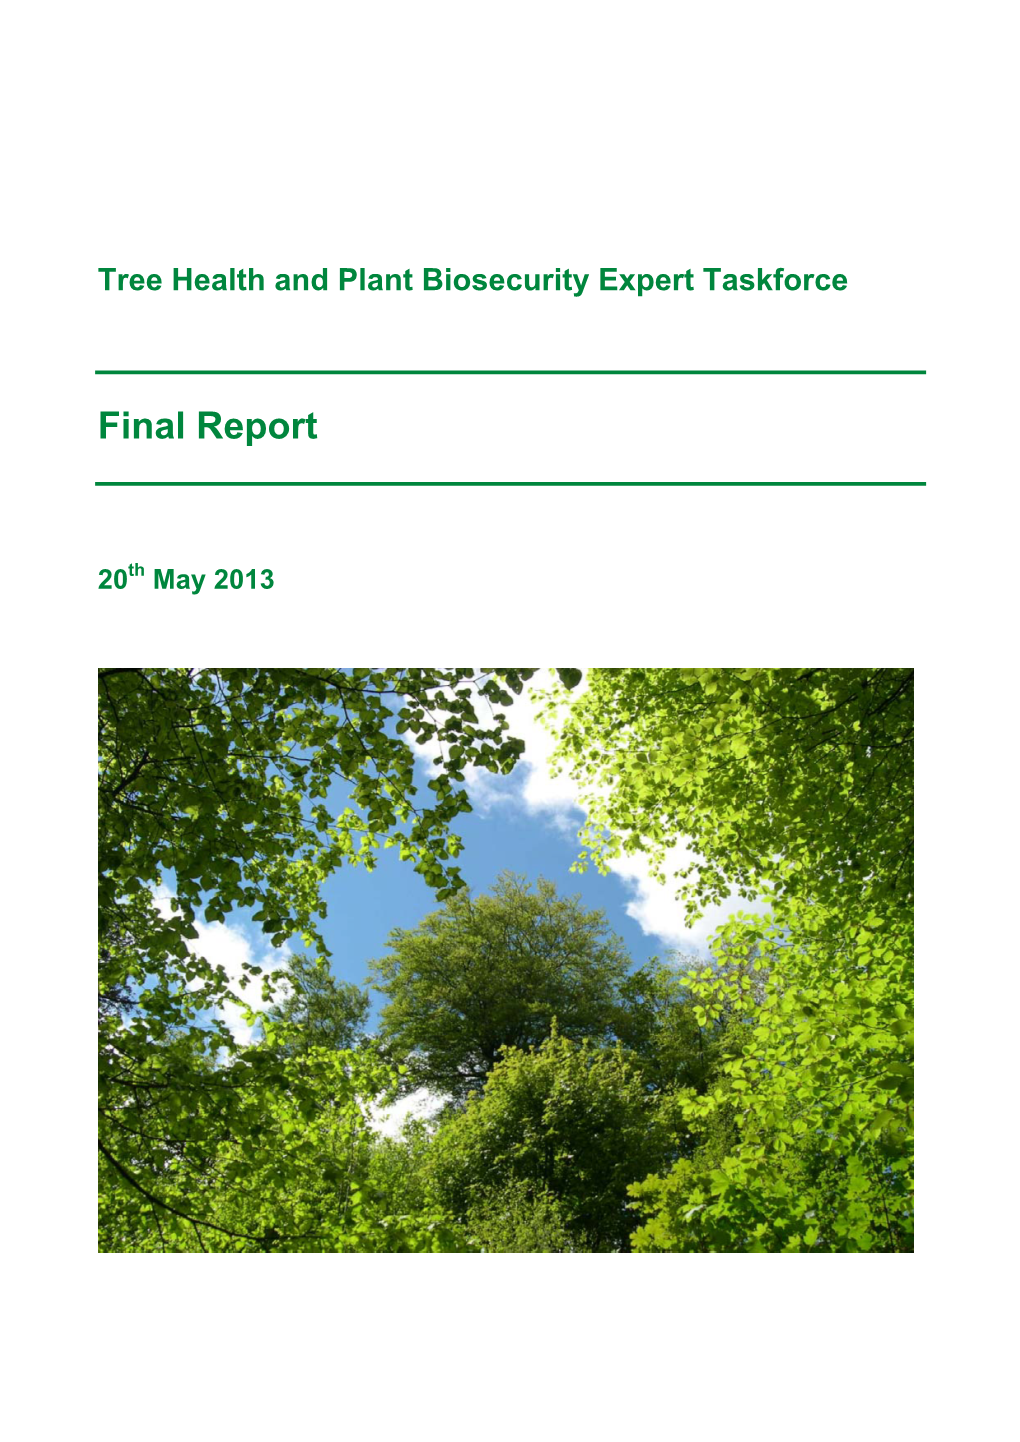 Tree Health and Plant Biosecurity Expert Taskforce: Final Report